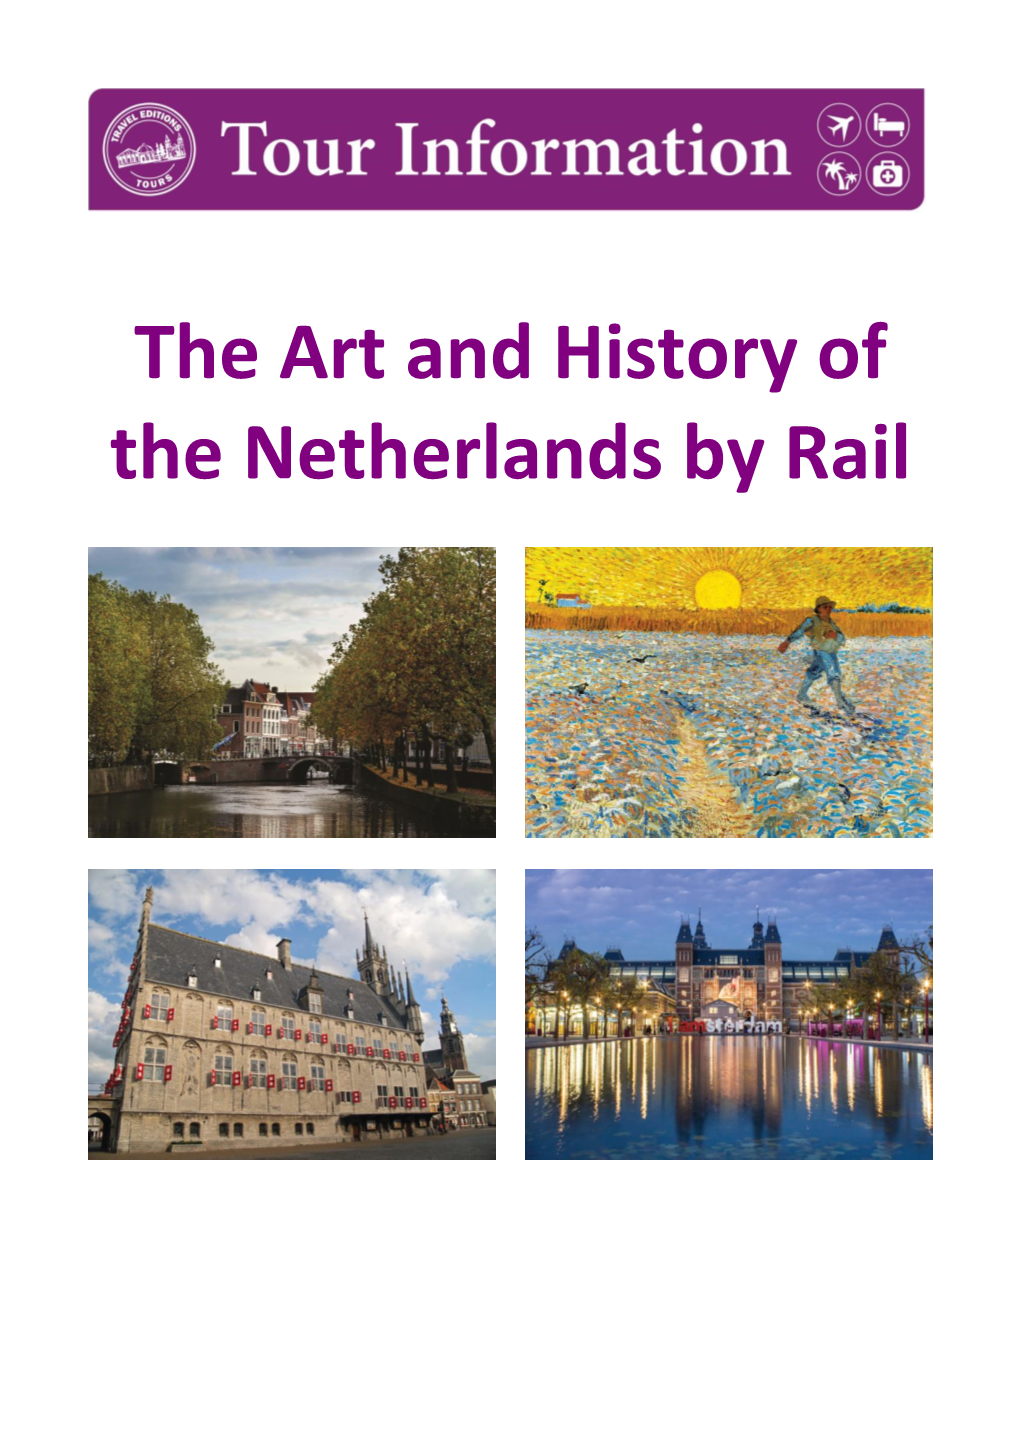 The Art and History of the Netherlands by Rail